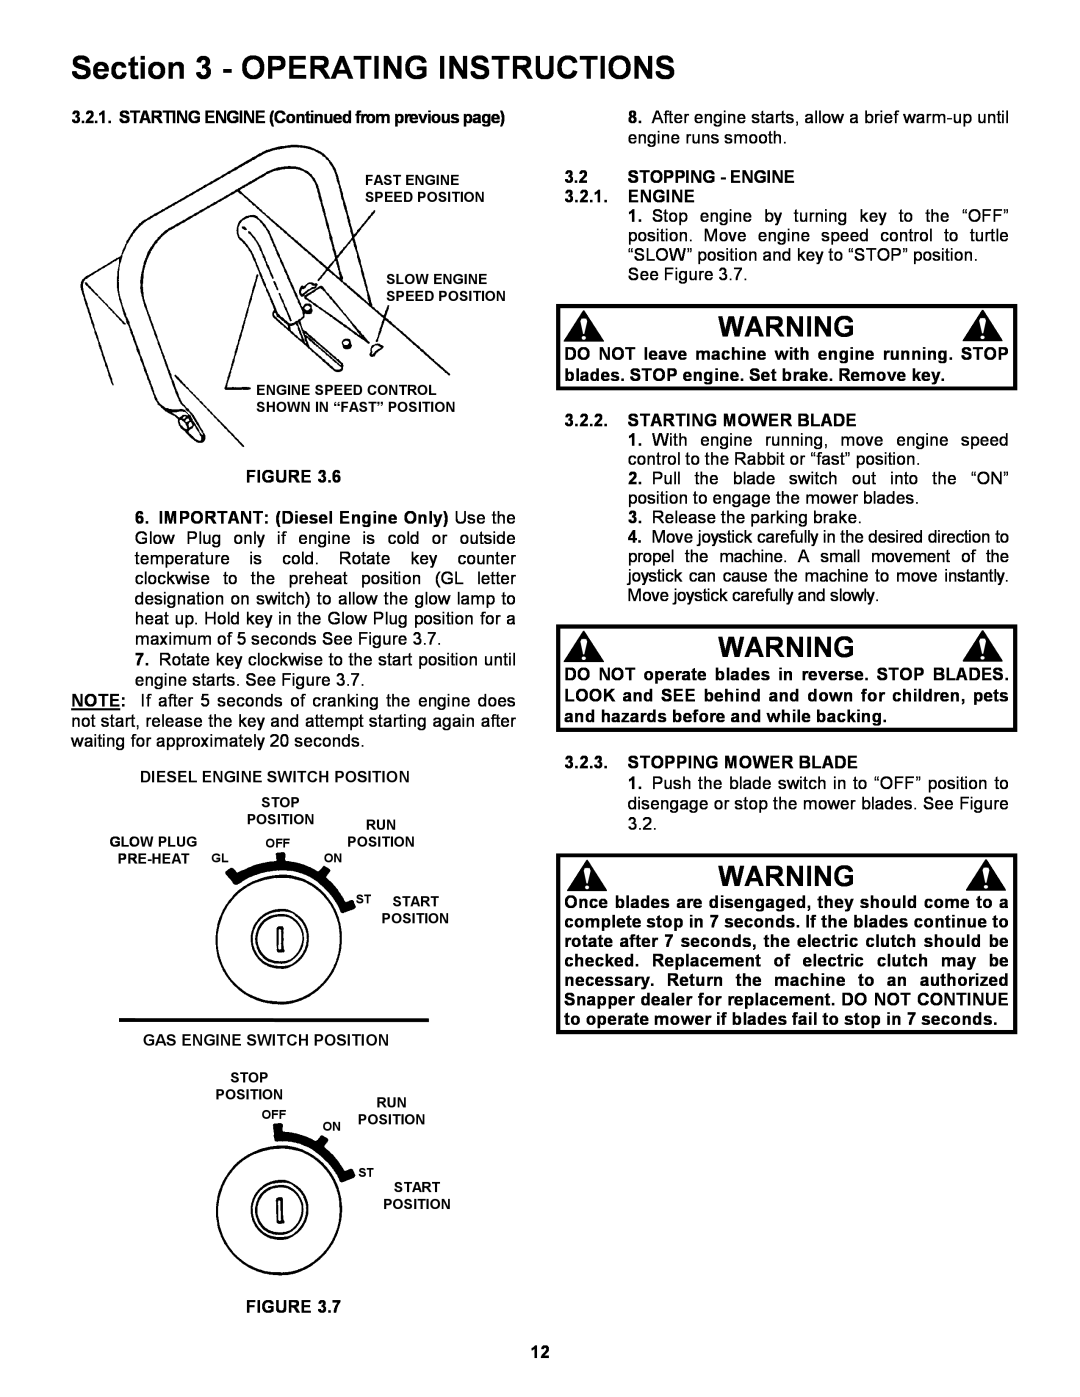 Snapper ZF5201M Operating Instructions, STARTING ENGINE Continued from previous page, STOPPING - ENGINE 3.2.1. ENGINE 